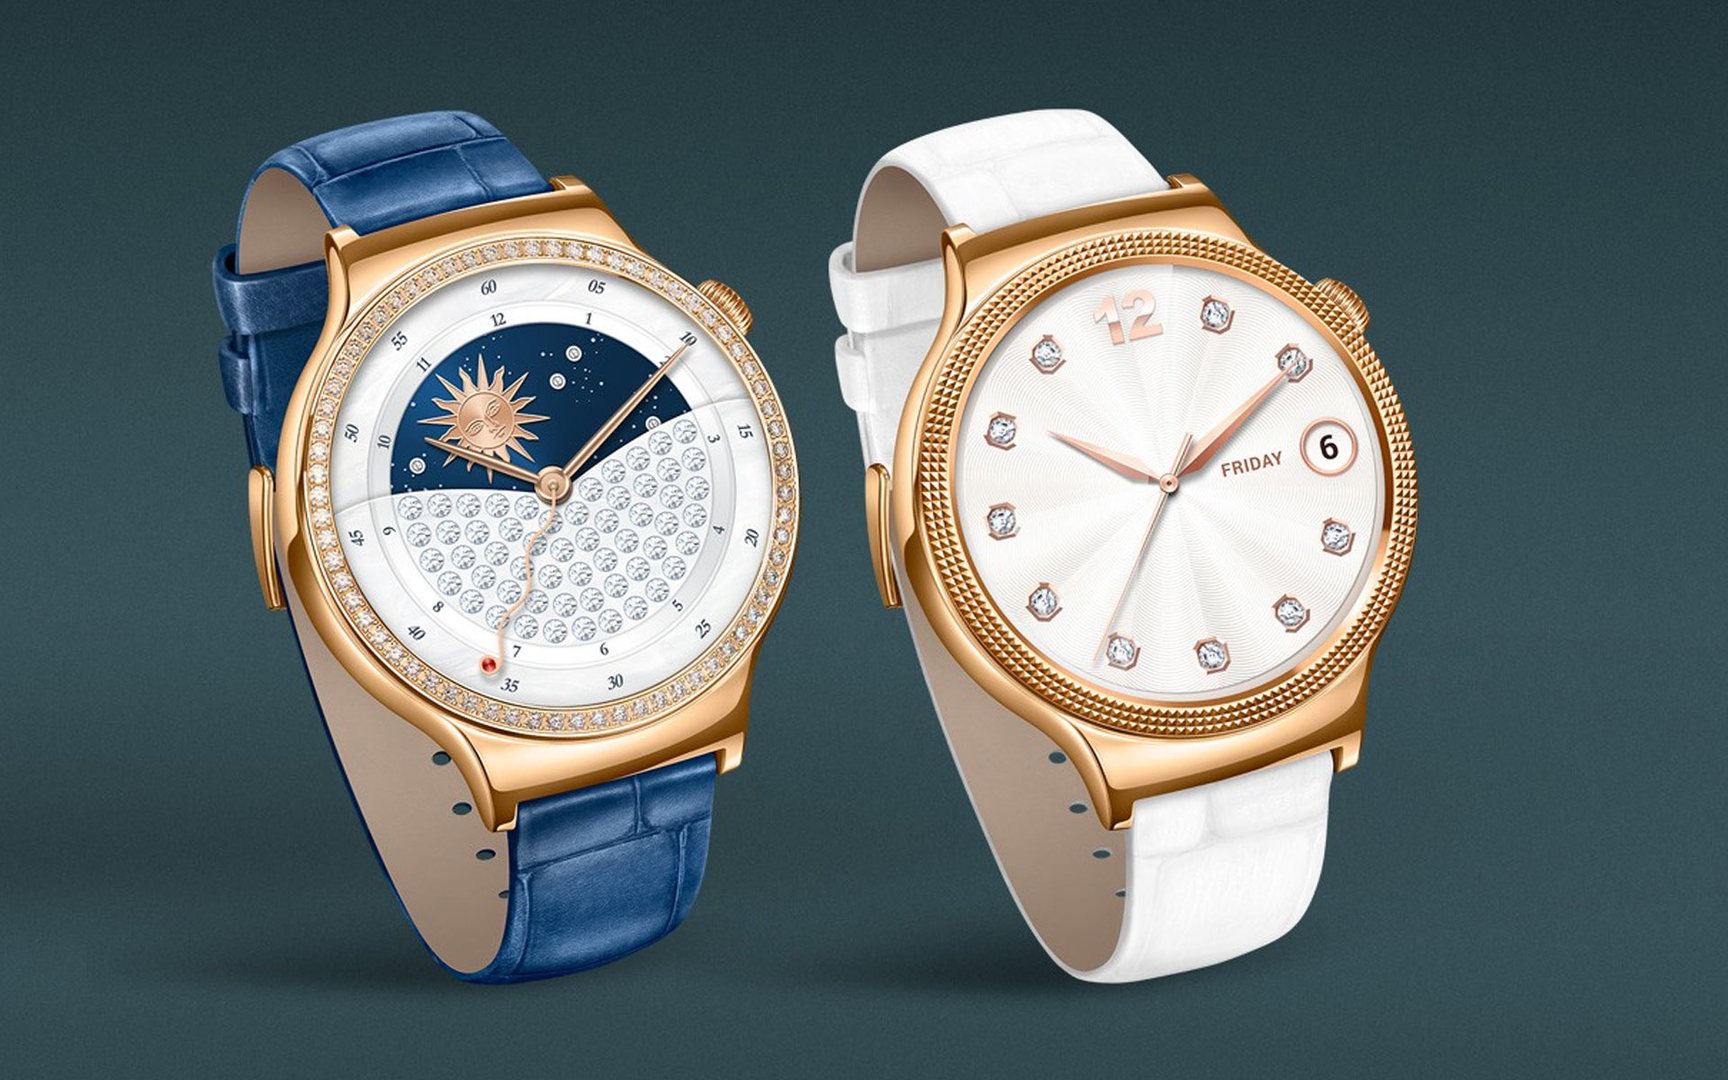 HUAWEI Delivers with Their Smartwatches for Ladies